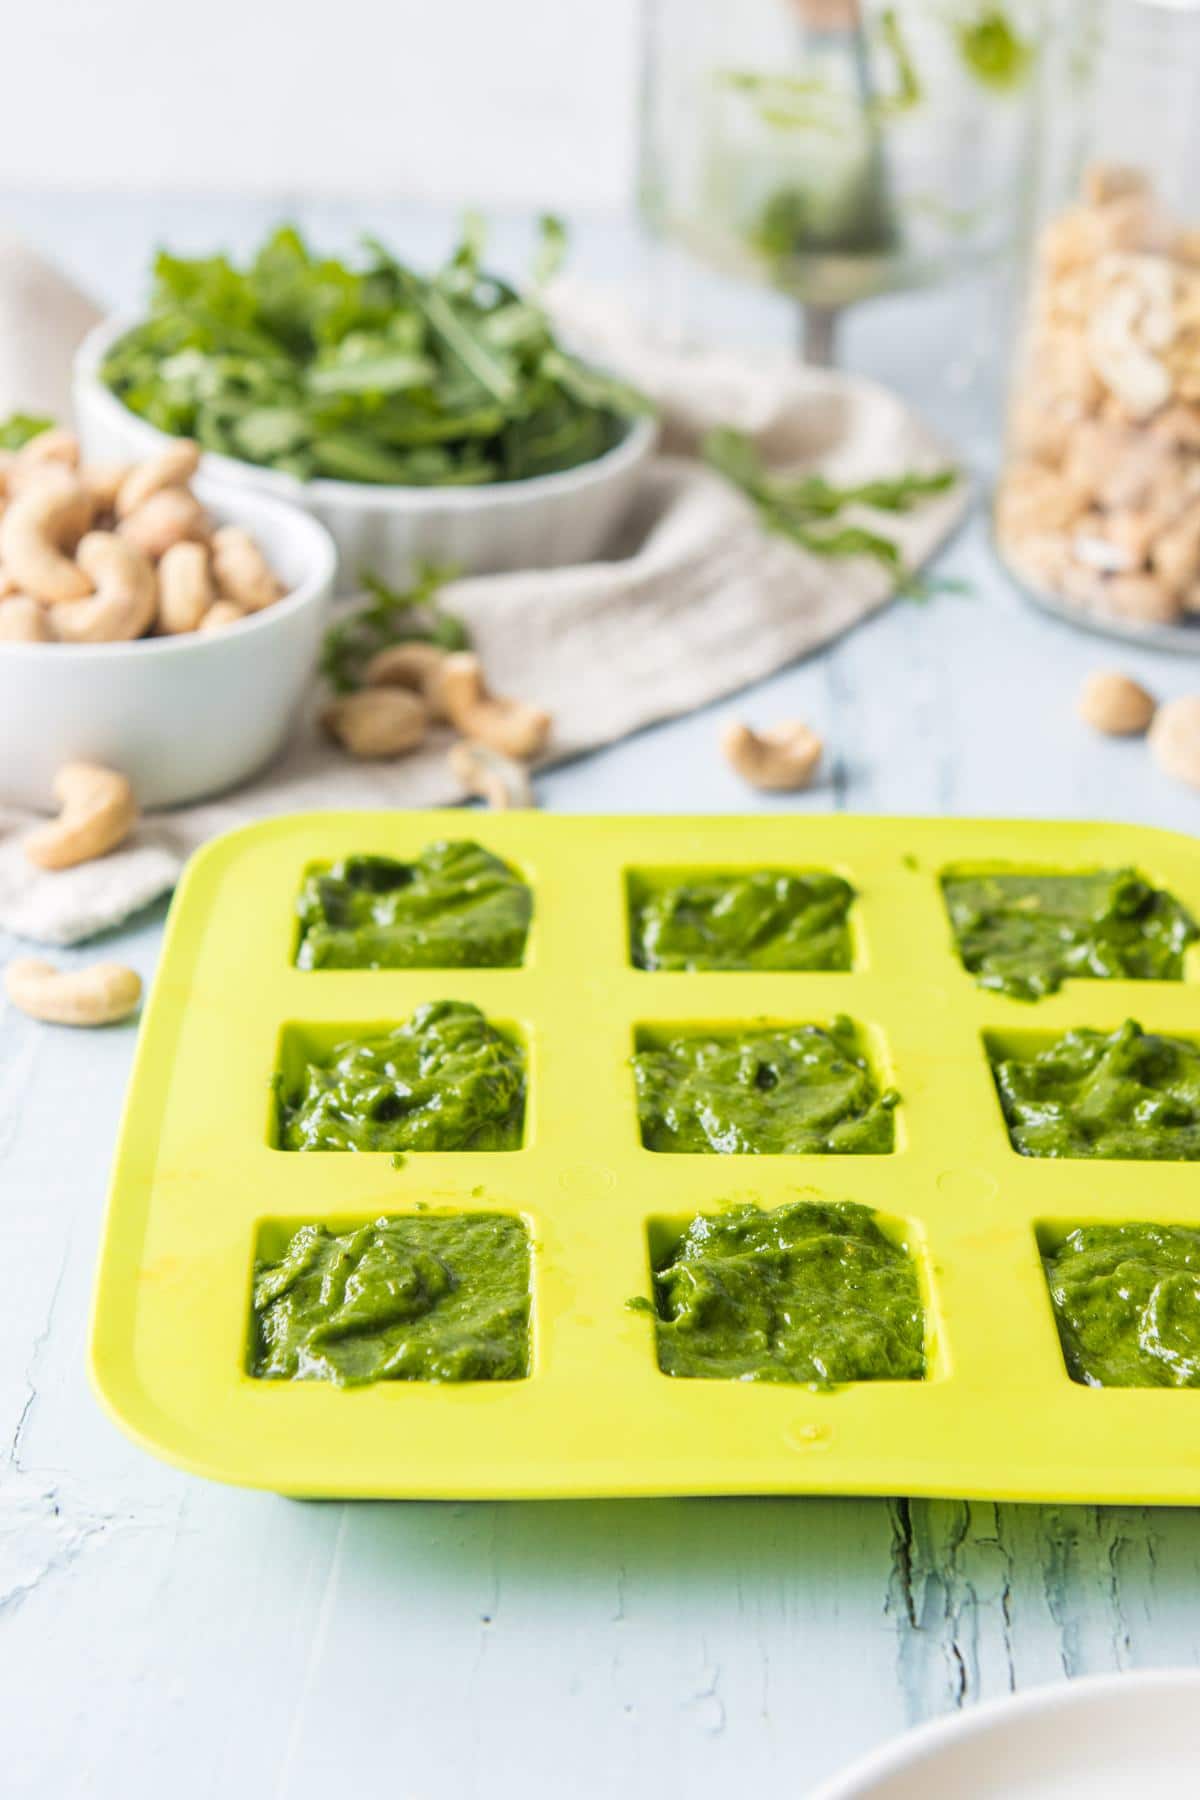 Green ice tray full of pesto on a table